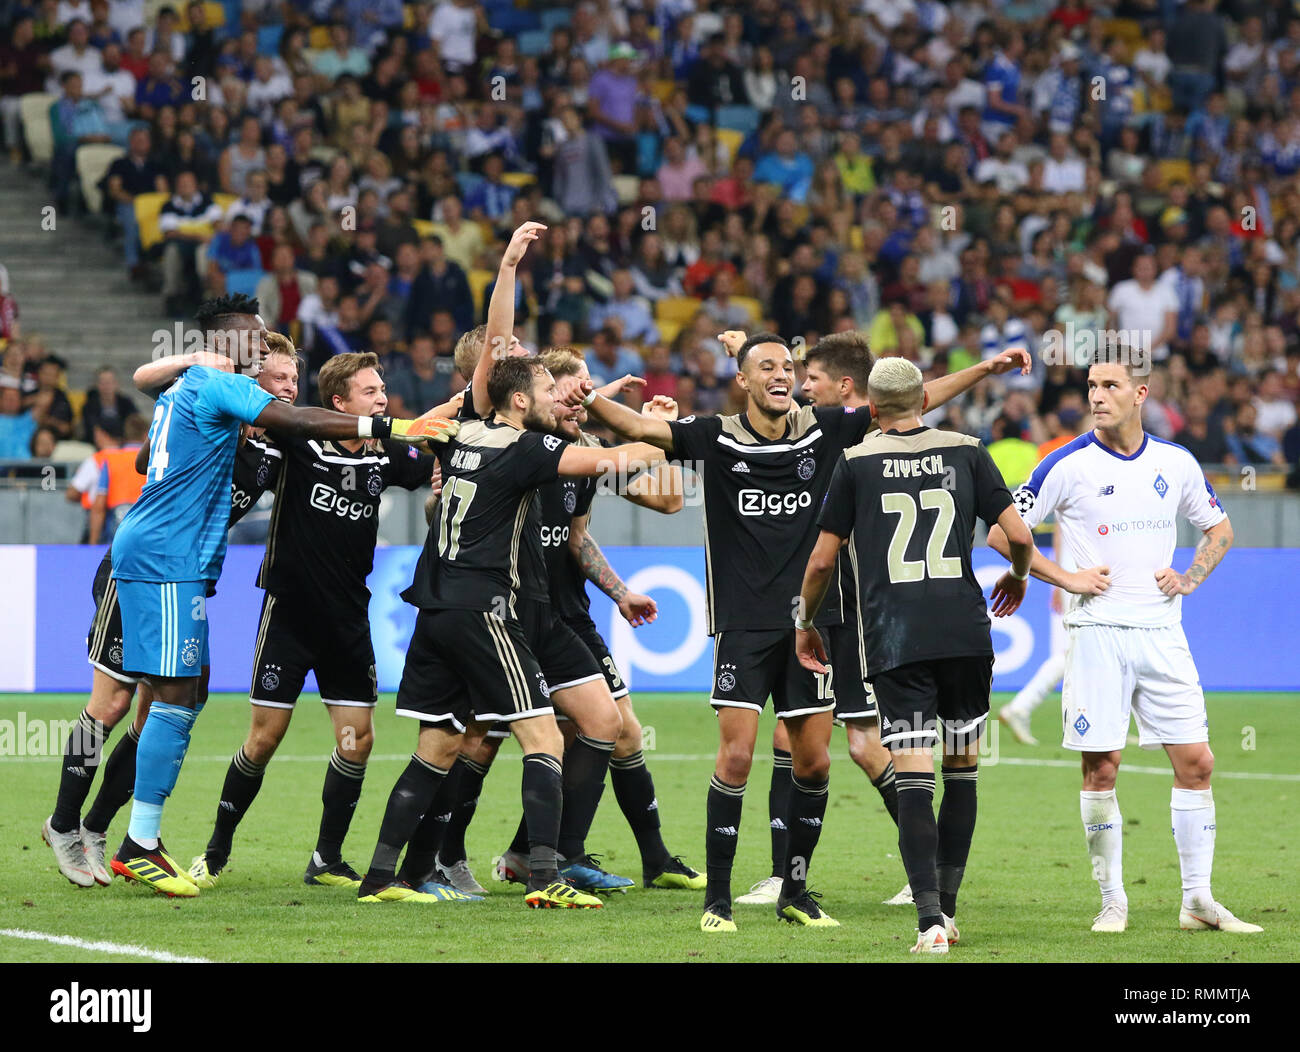 KYIV, UKRAINE - AUGUST 28, 2018: AFC Ajax players celebrate the reach of group stage after the UEFA Champions League play-off game against FC Dynamo K Stock Photo